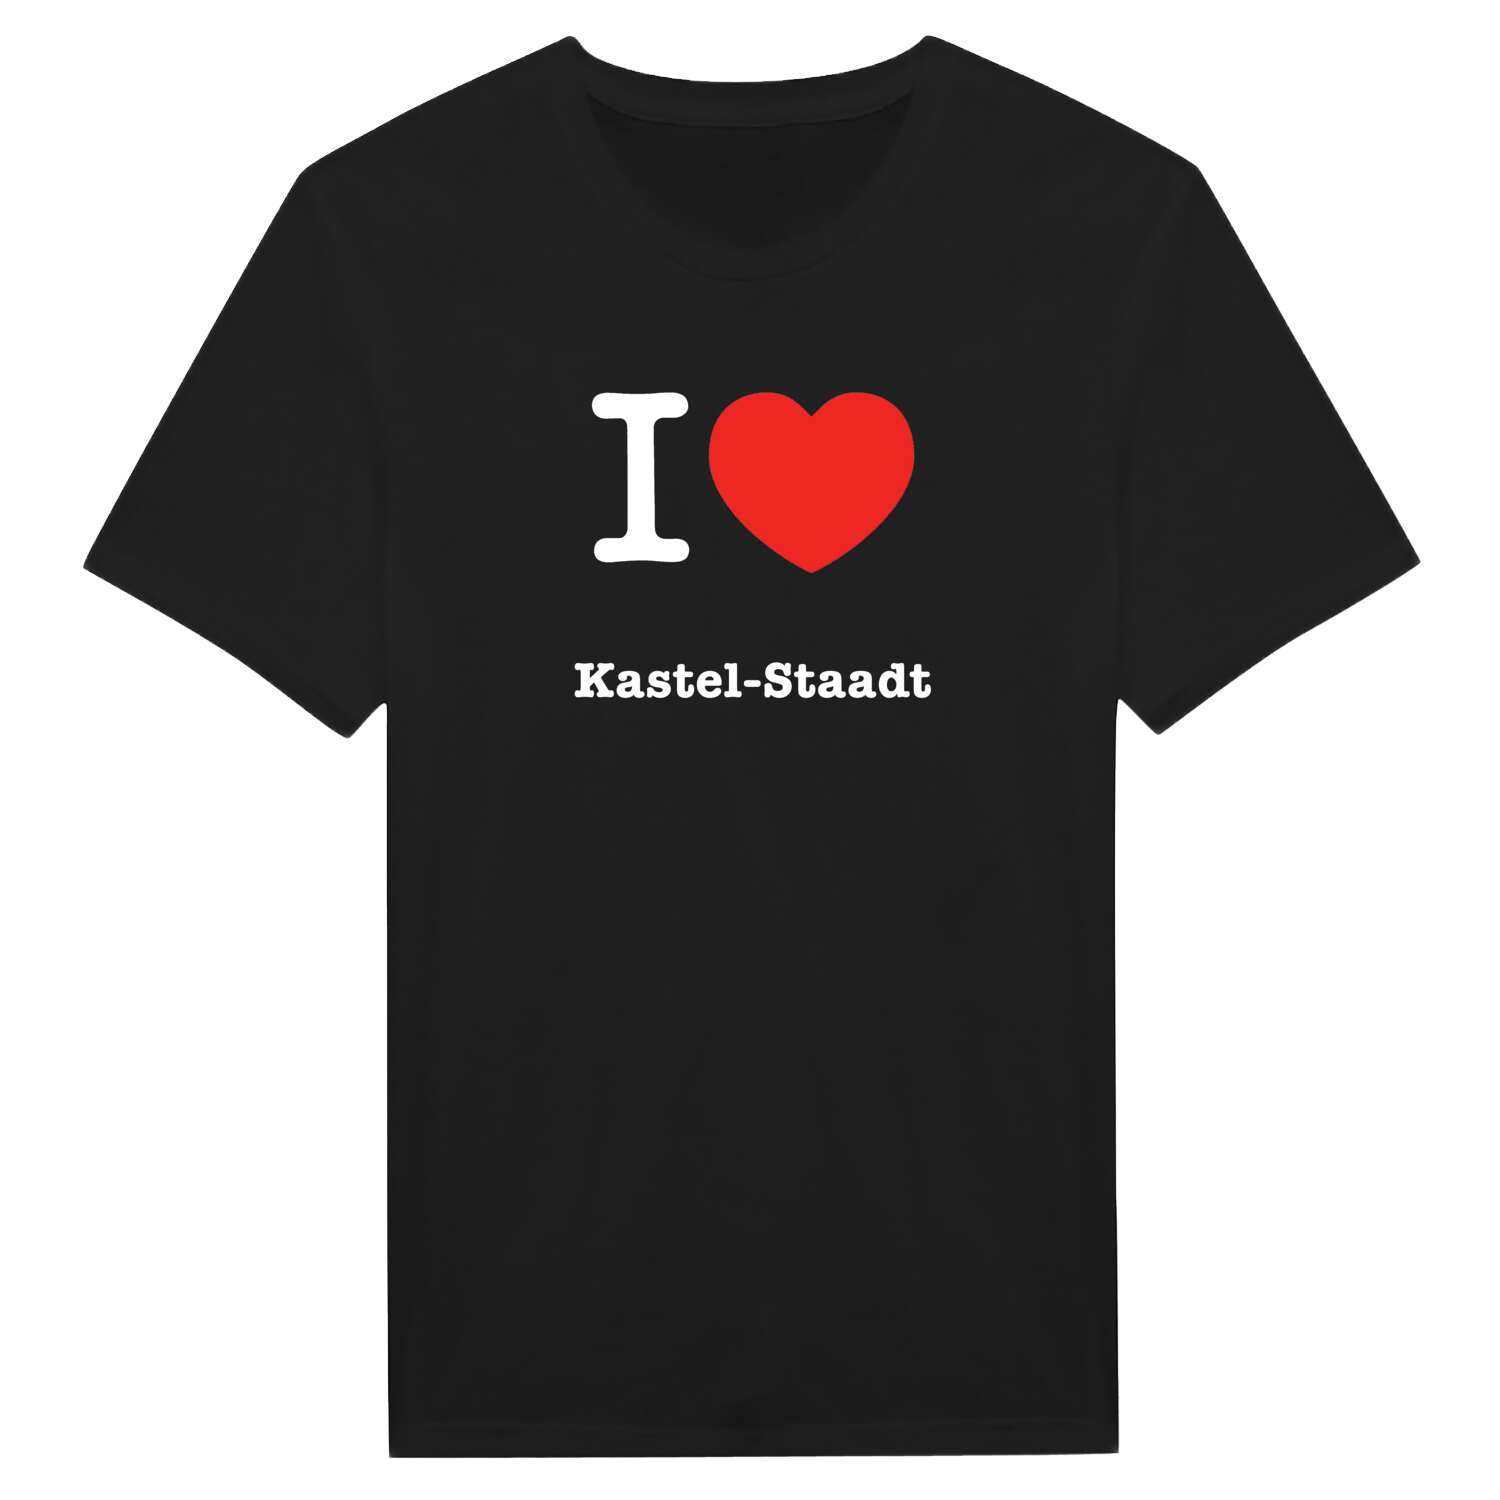 Kastel-Staadt T-Shirt »I love«